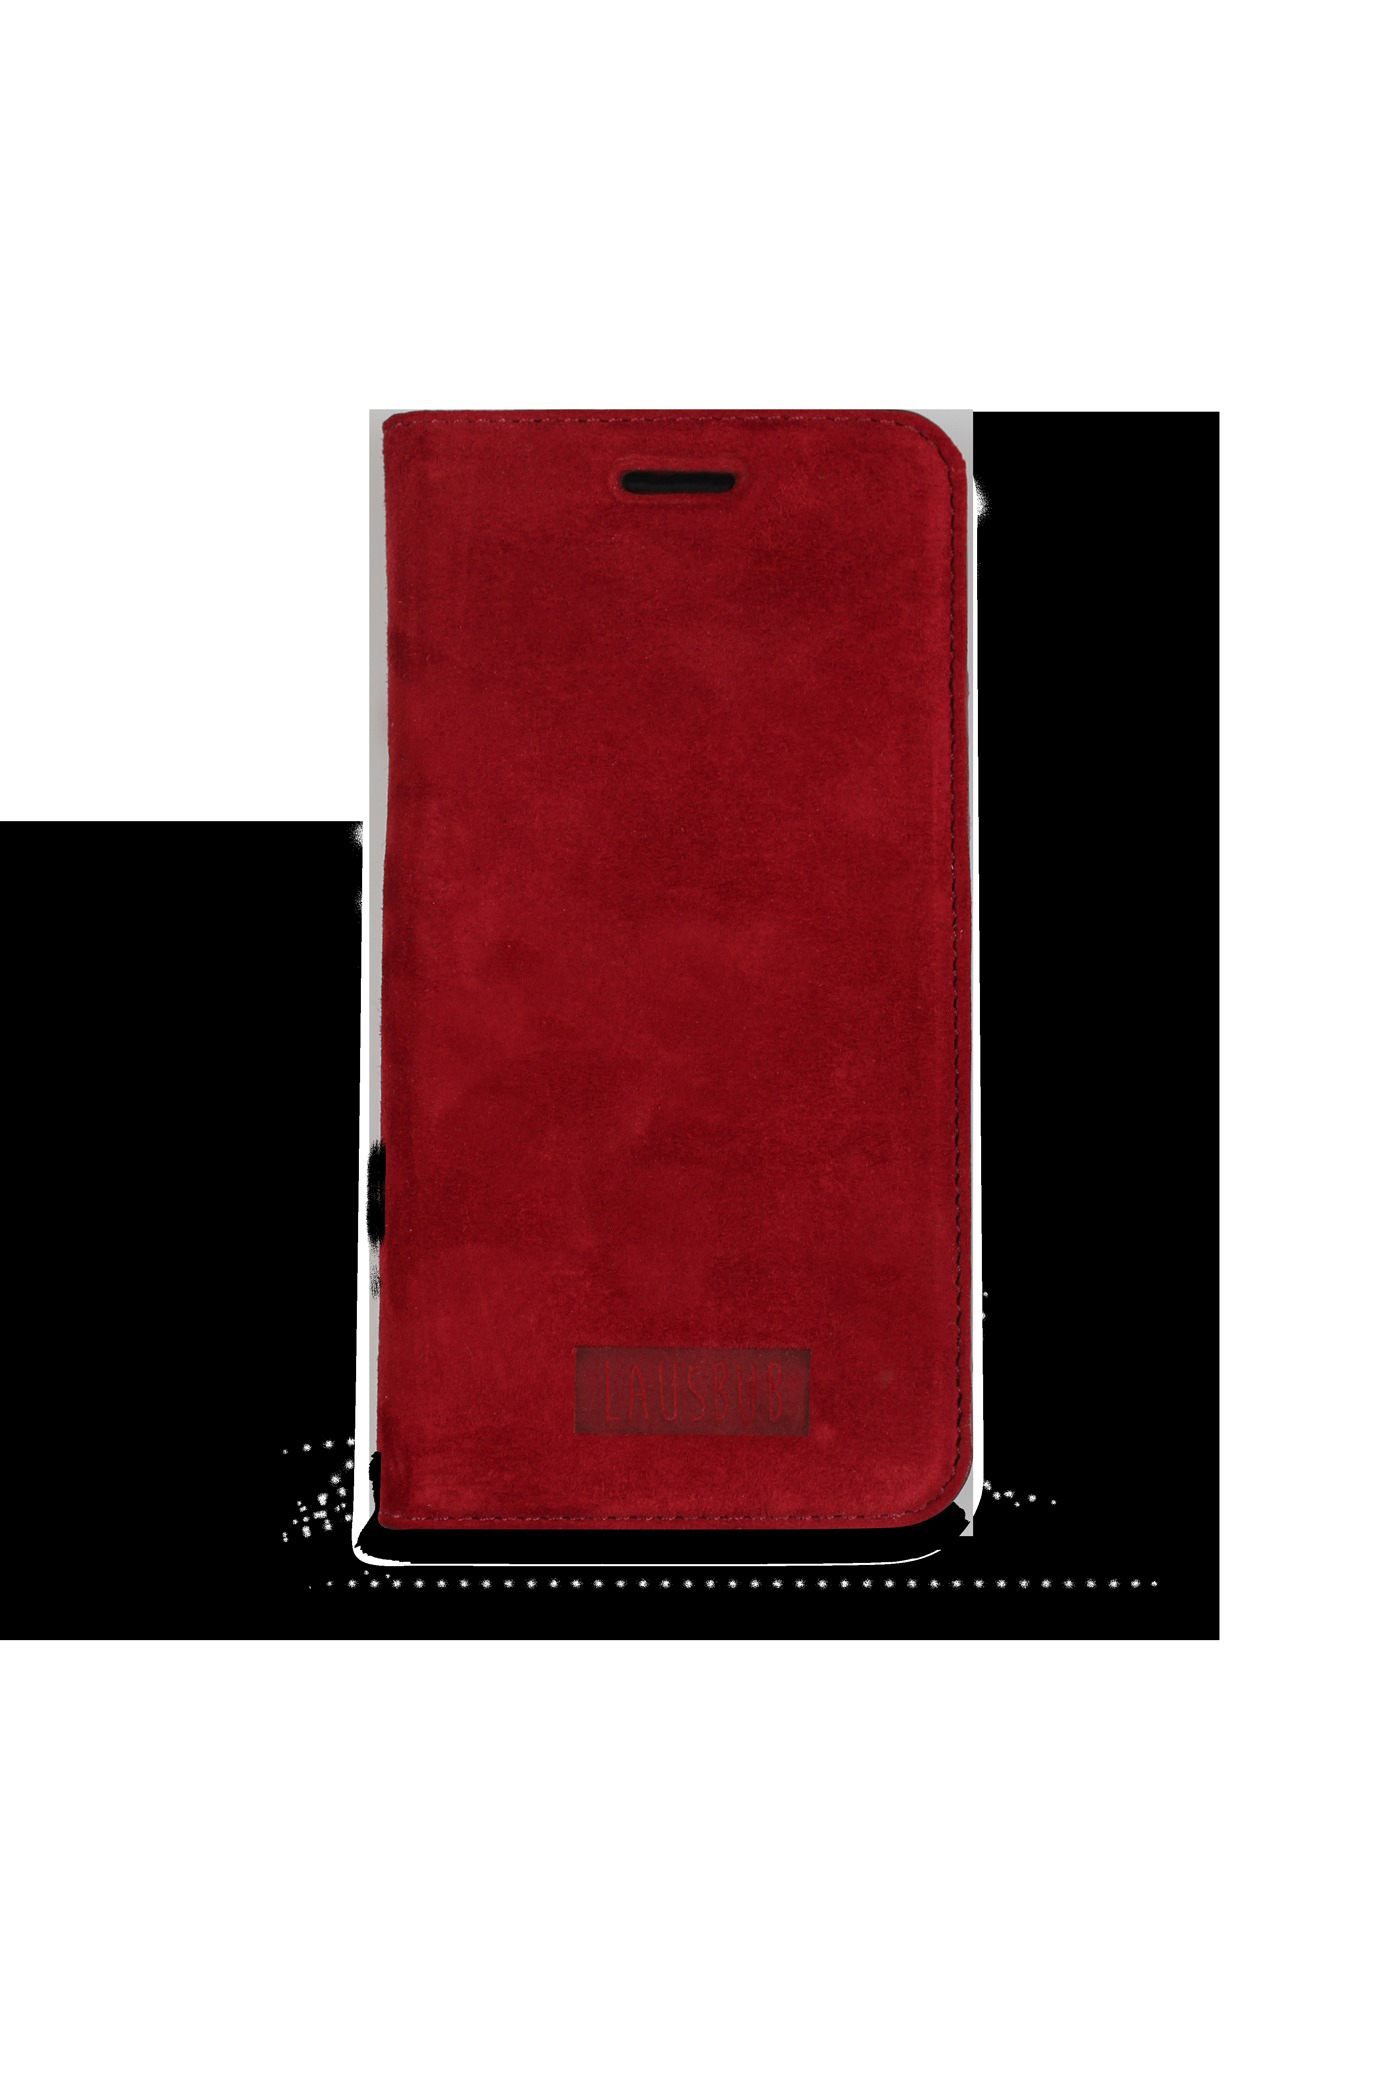 6s, Tender Apple, Bookcover, 6, LAUSBUB iPhone Frechdachs, Red iPhone